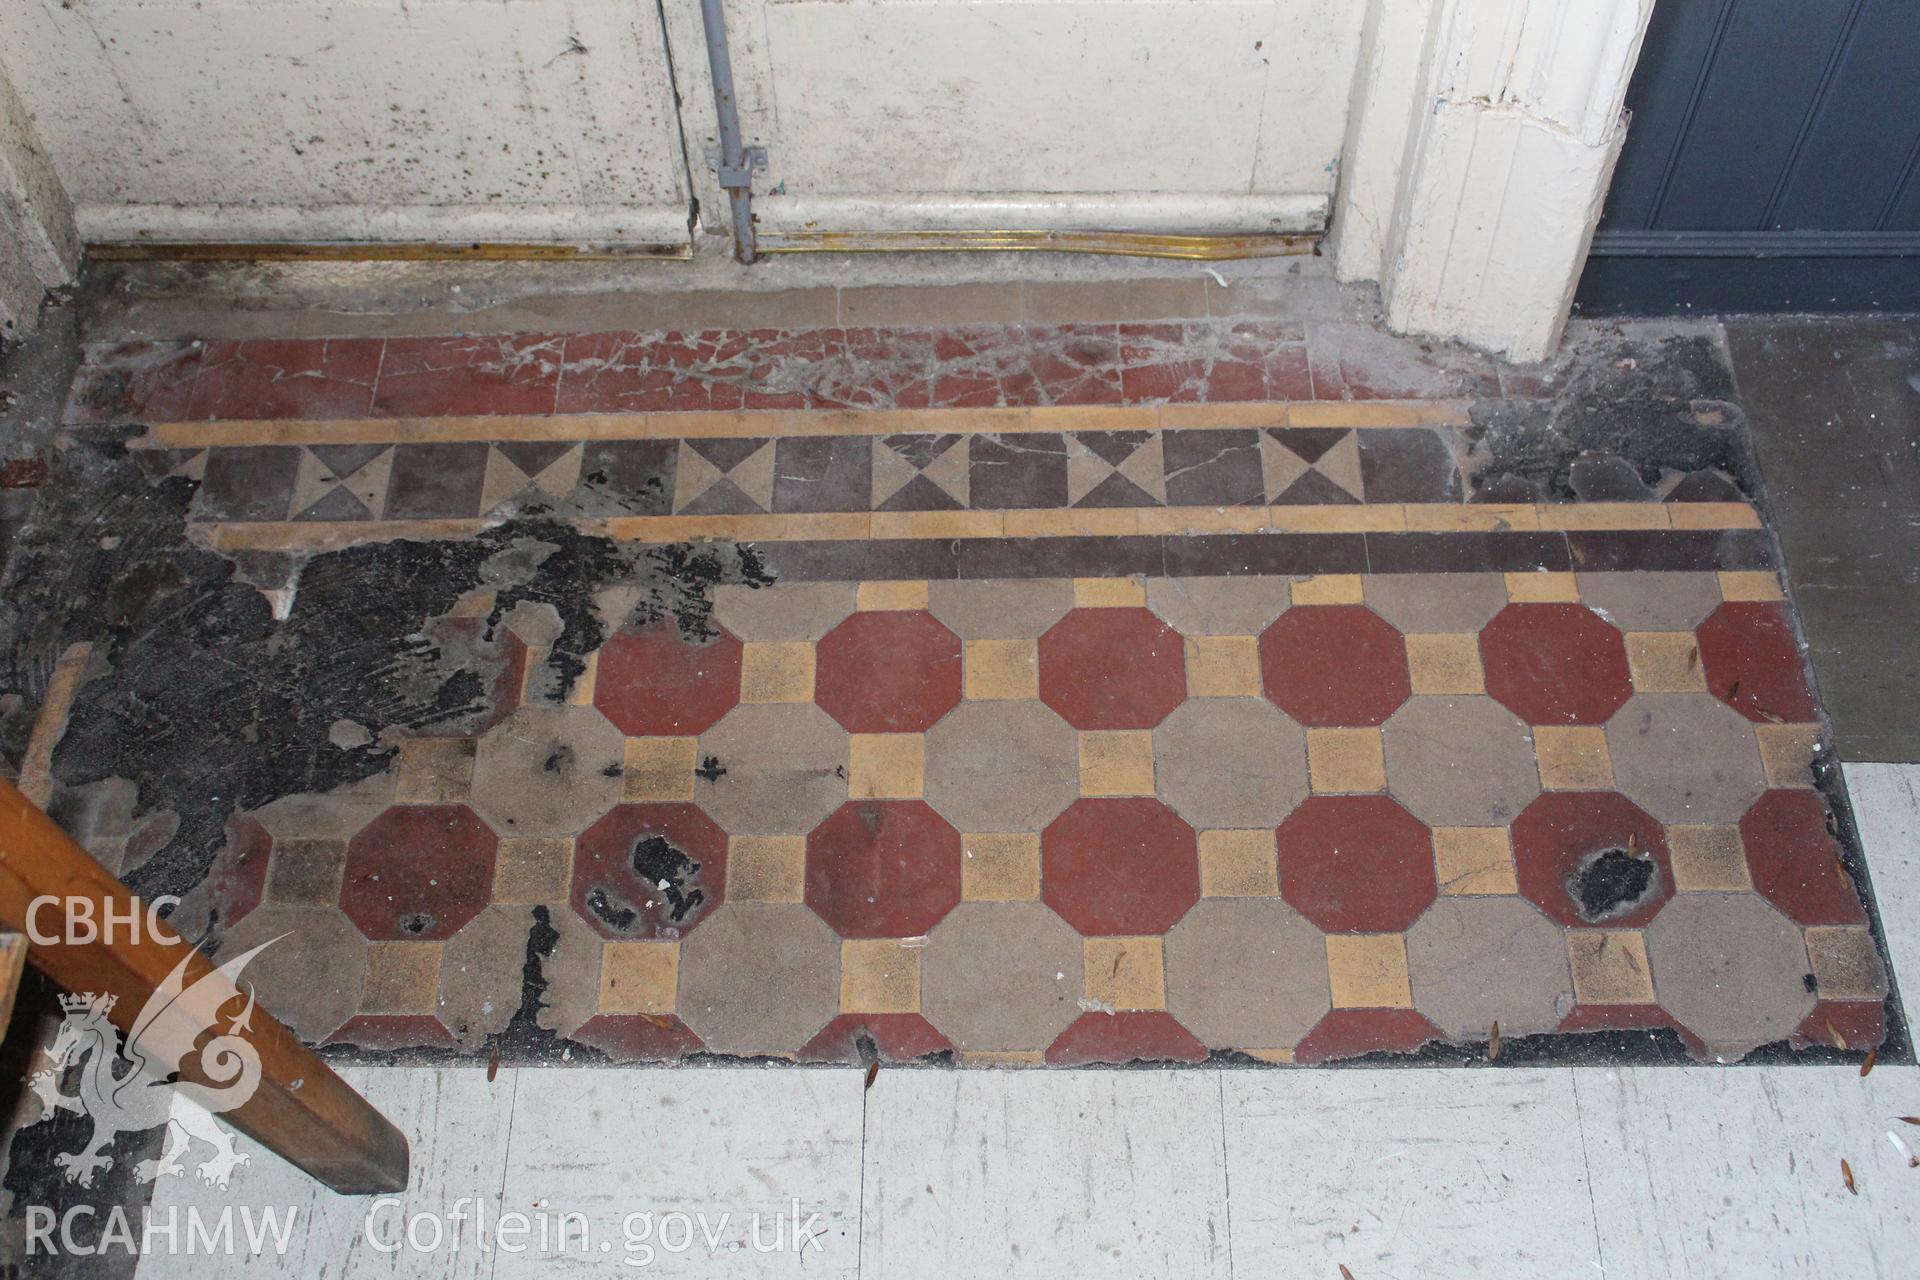 Detailed view of interior tiled floor at the Railway Institute, Bangor. Photographed during survey conducted by Sue Fielding for the RCAHMW on 4th April 2016.